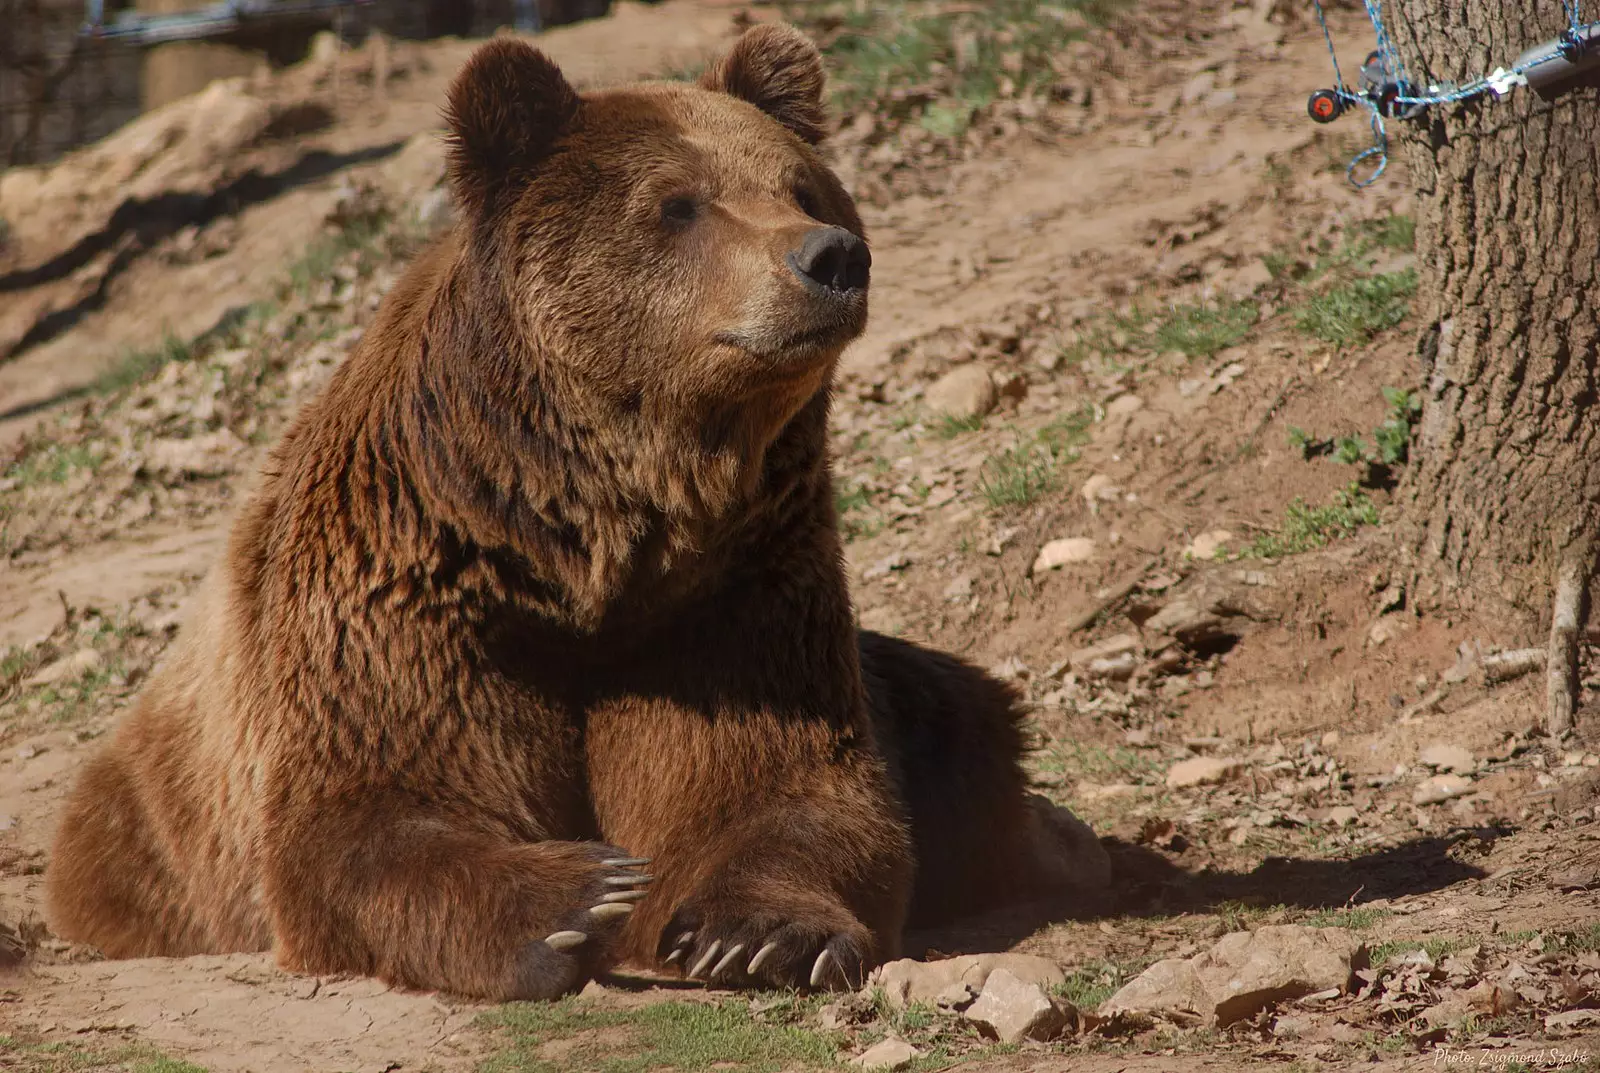 Brown bears aren't actually found in North Carolina, although black bears are (